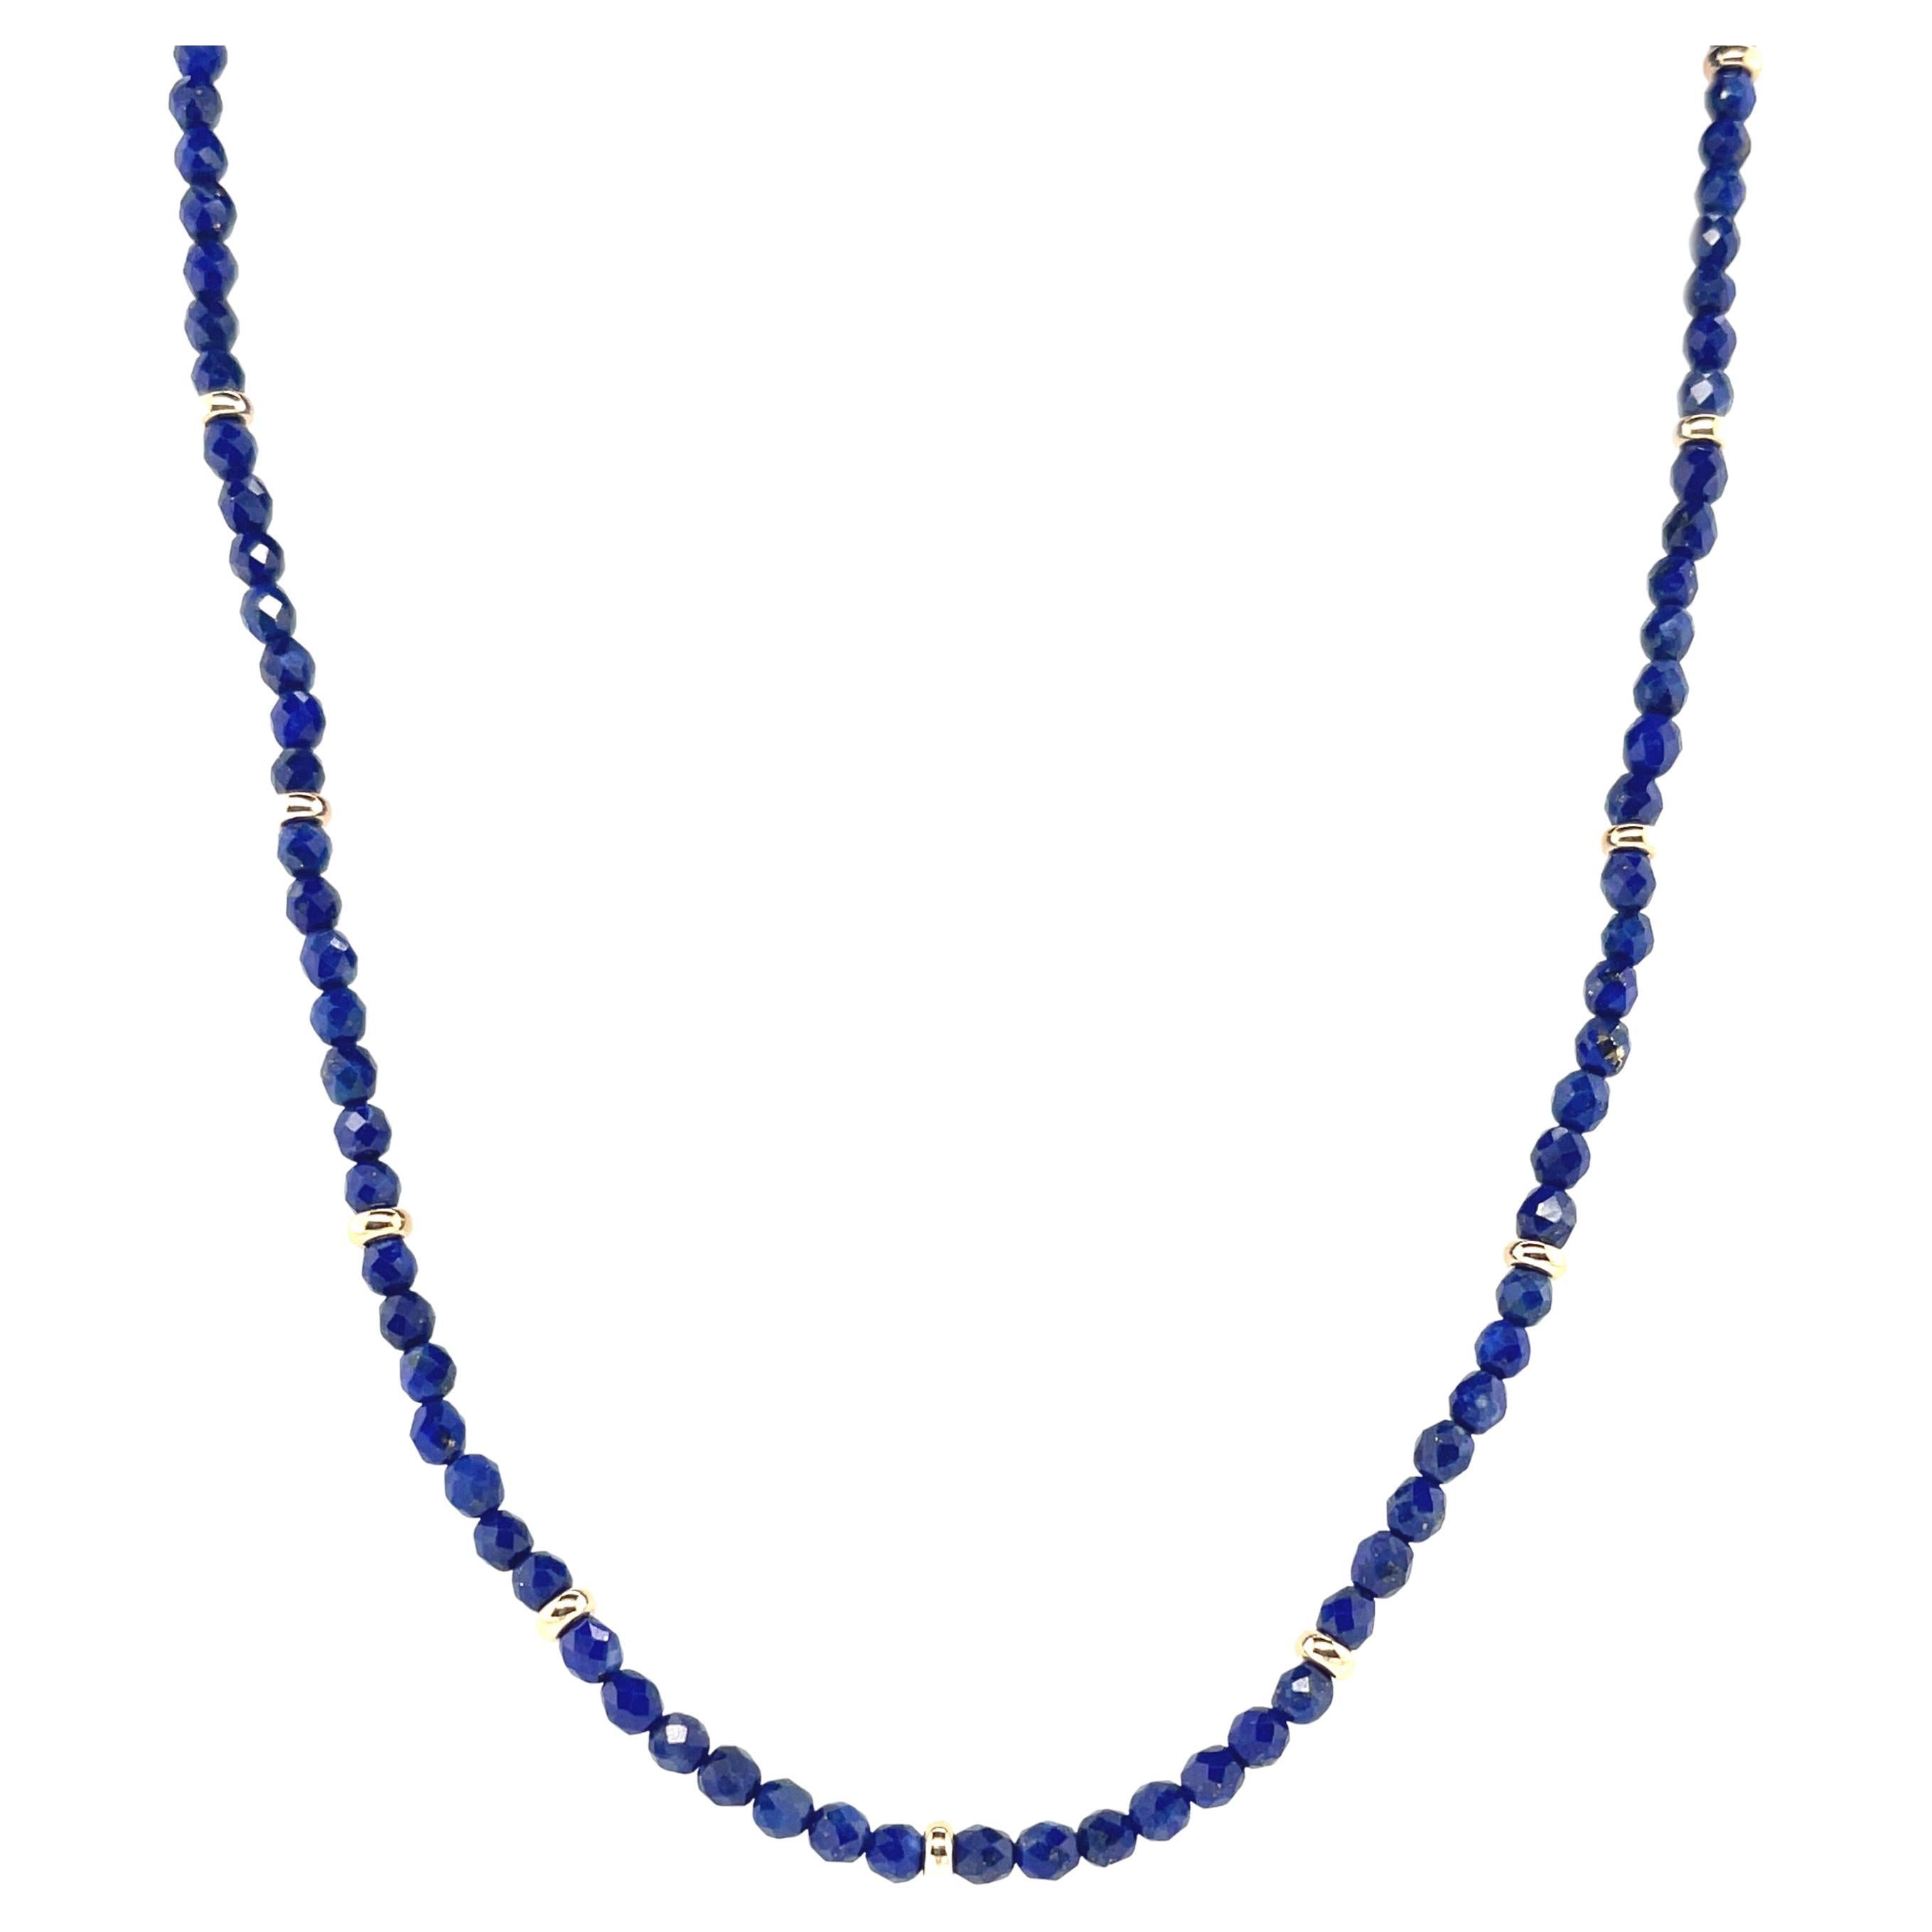 This strand of faceted lapis lazuli beads is a stylish way to bring elegance and color to any outfit!  Featuring 3.00mm lapis beads with wonderfully rich, royal blue color, the facets on these gems catch the light beautifully and are complemented